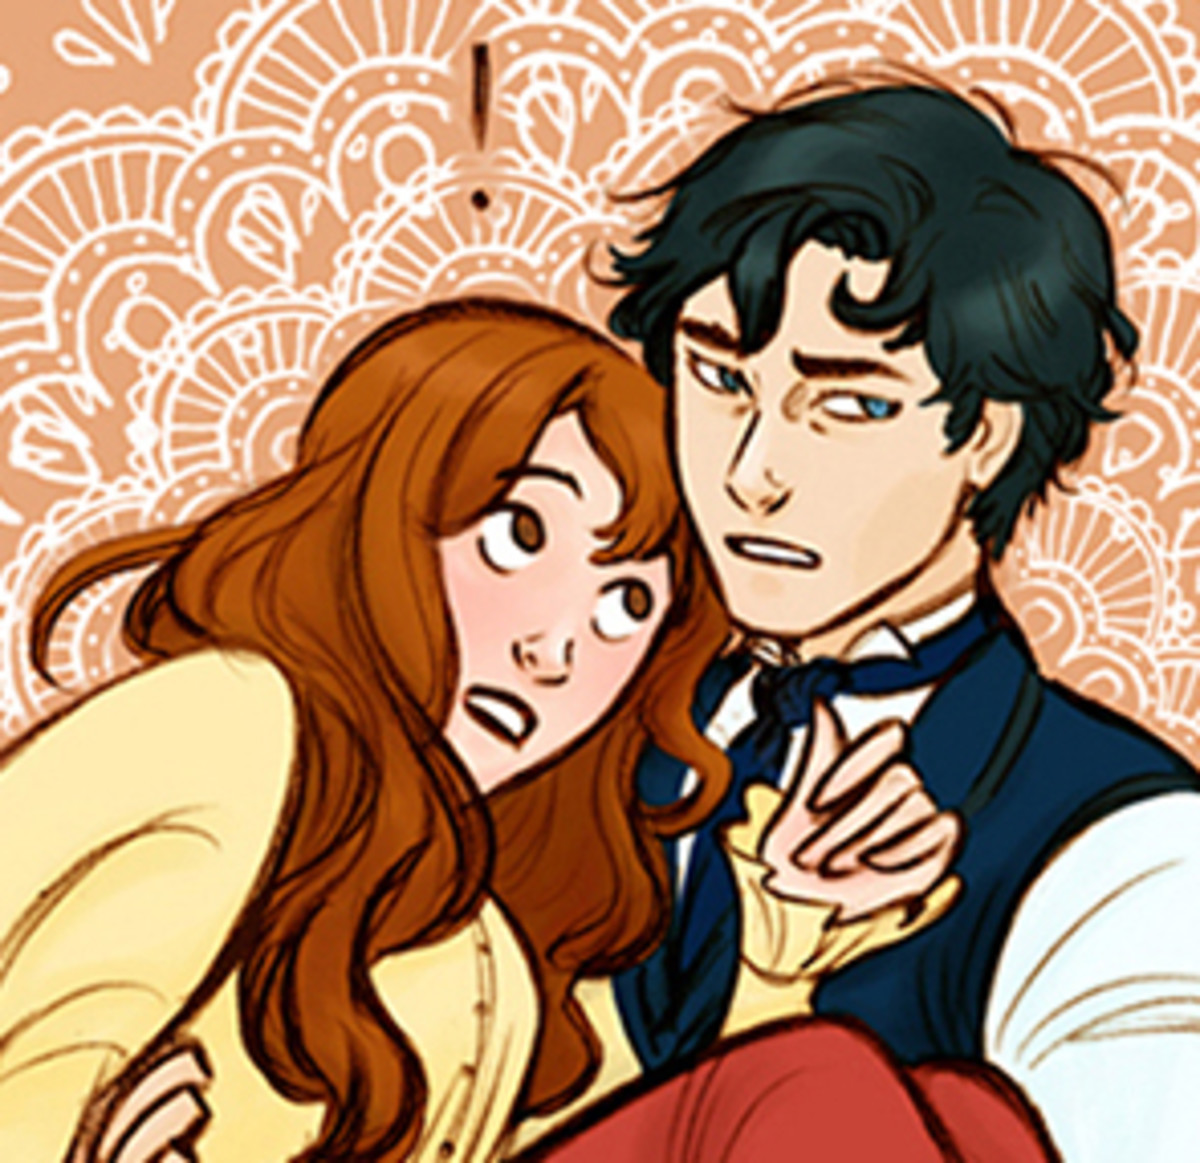 Miss Abbot And The Doctor Top 10 Webtoon Recommendations | HubPages